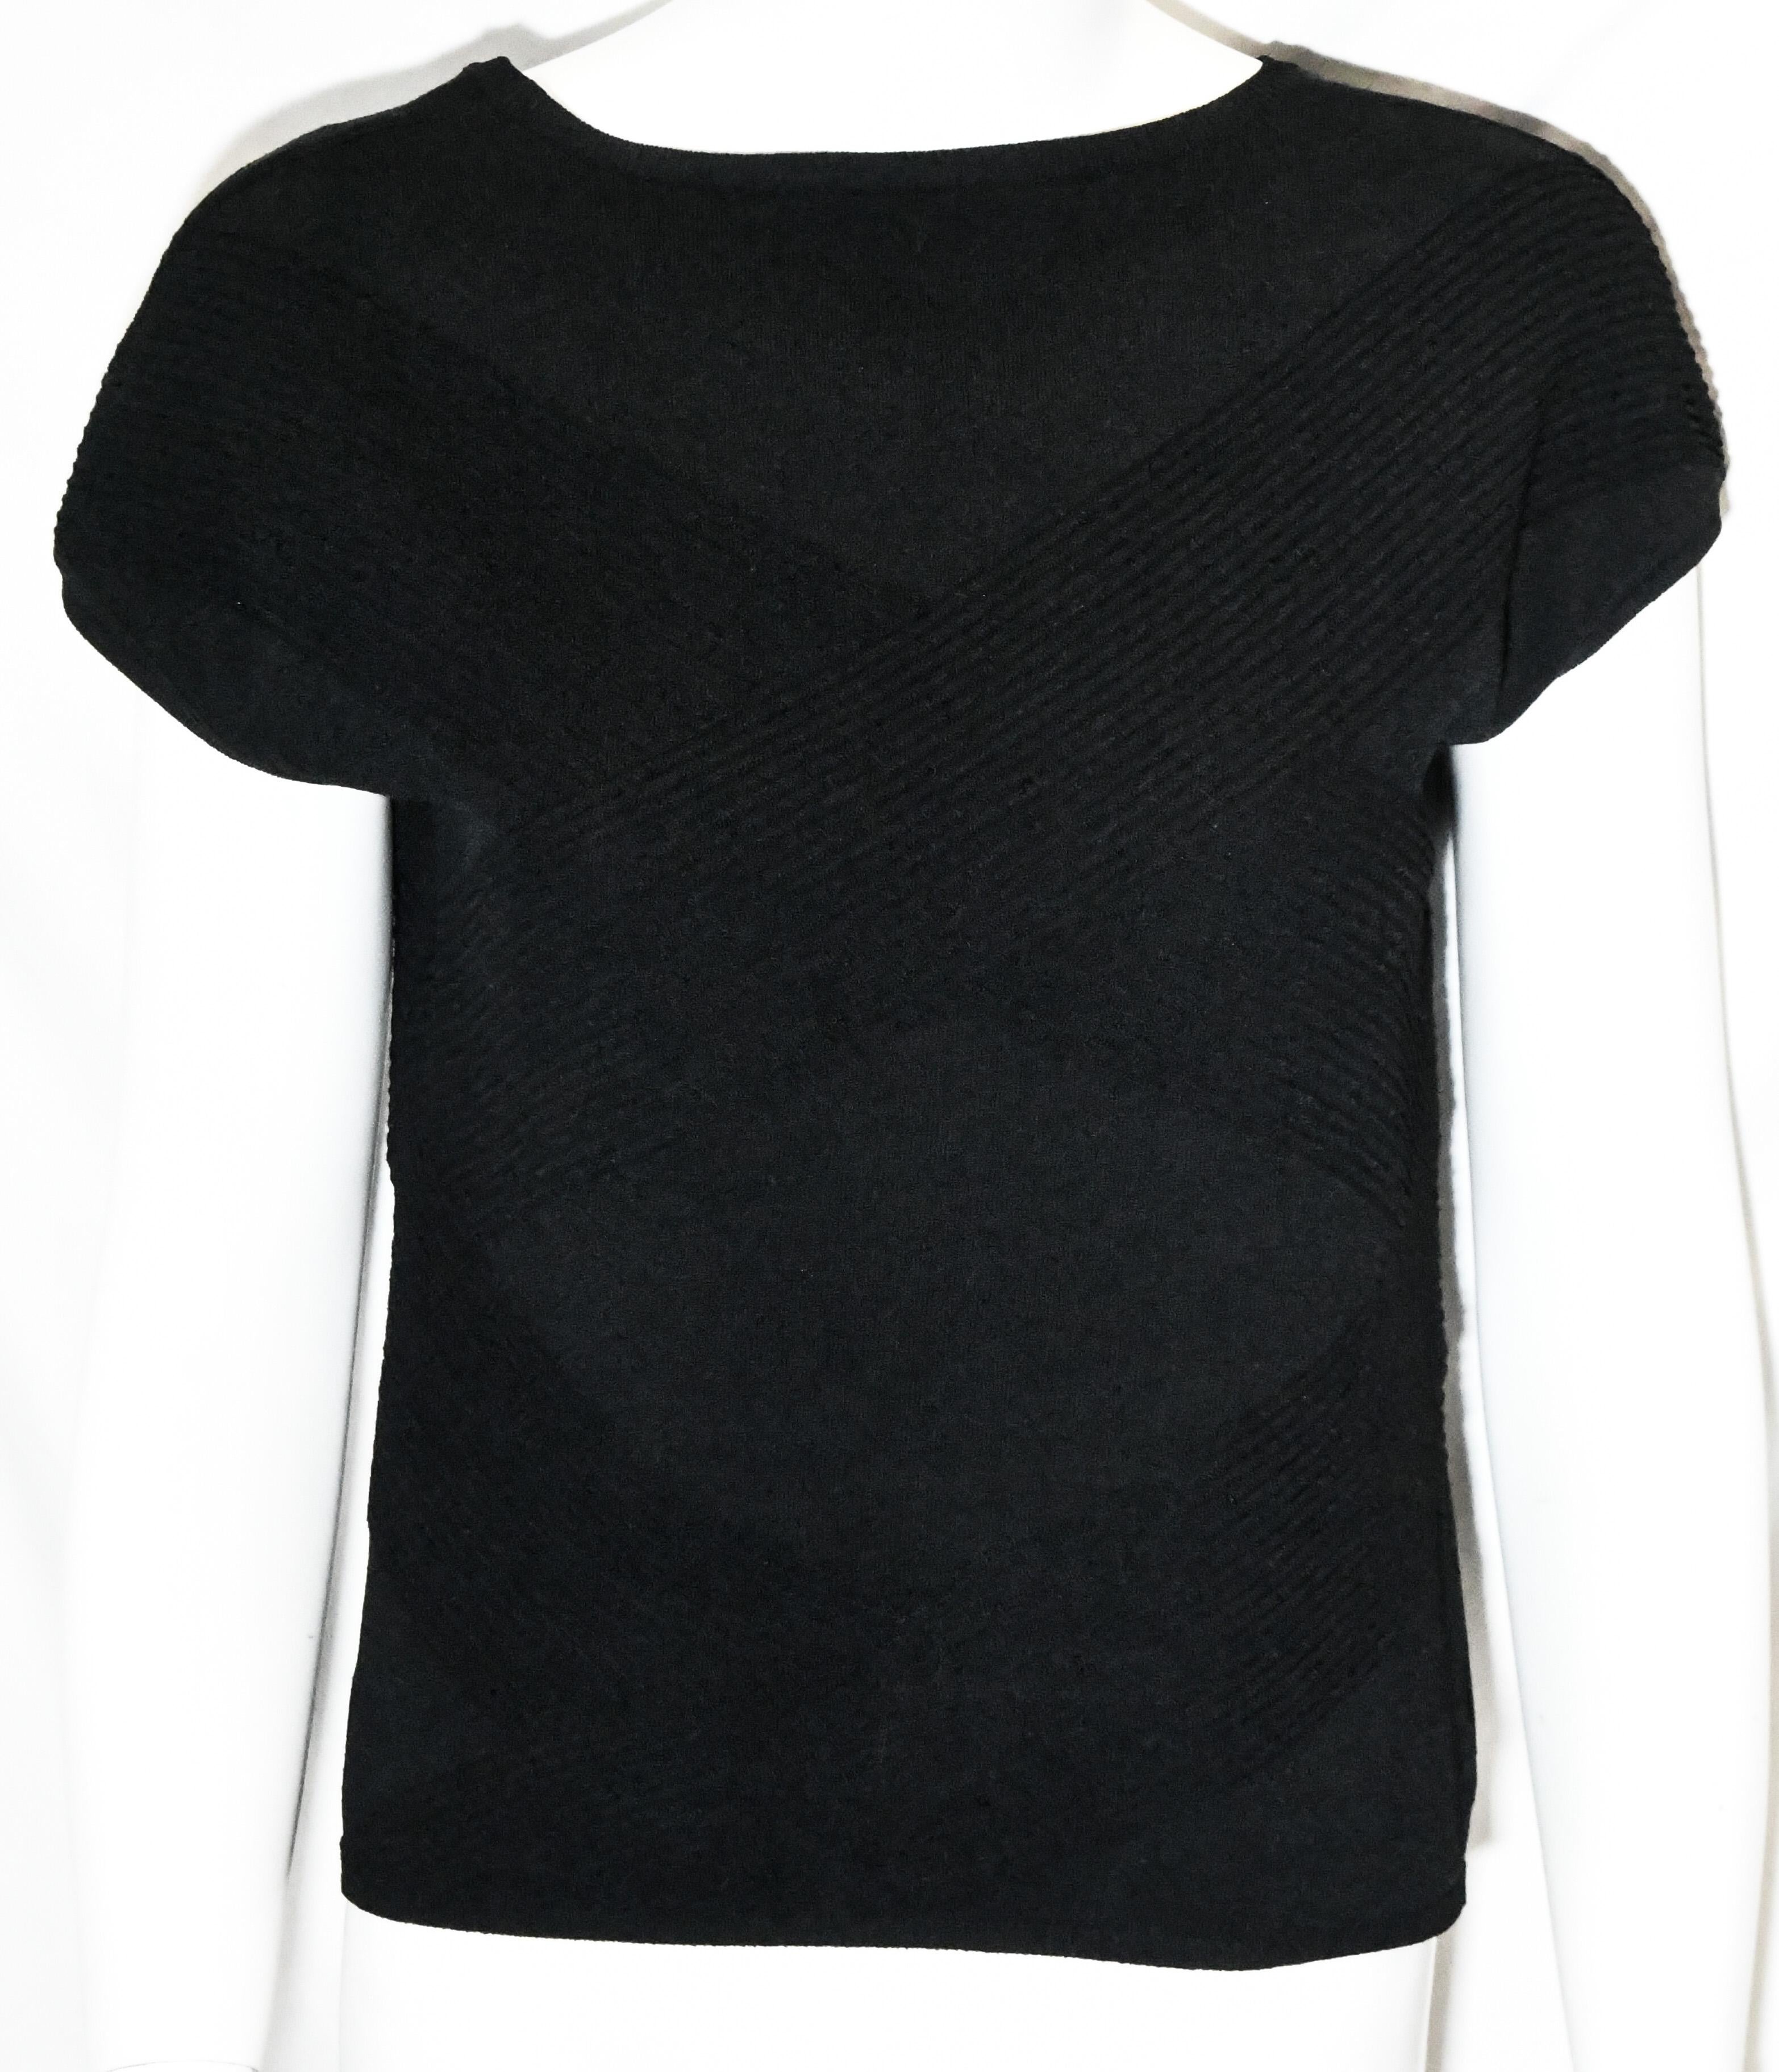 Chanel Black Knit Cap Sleeve Top From The 2003 Fall Collection  In Excellent Condition For Sale In Palm Beach, FL